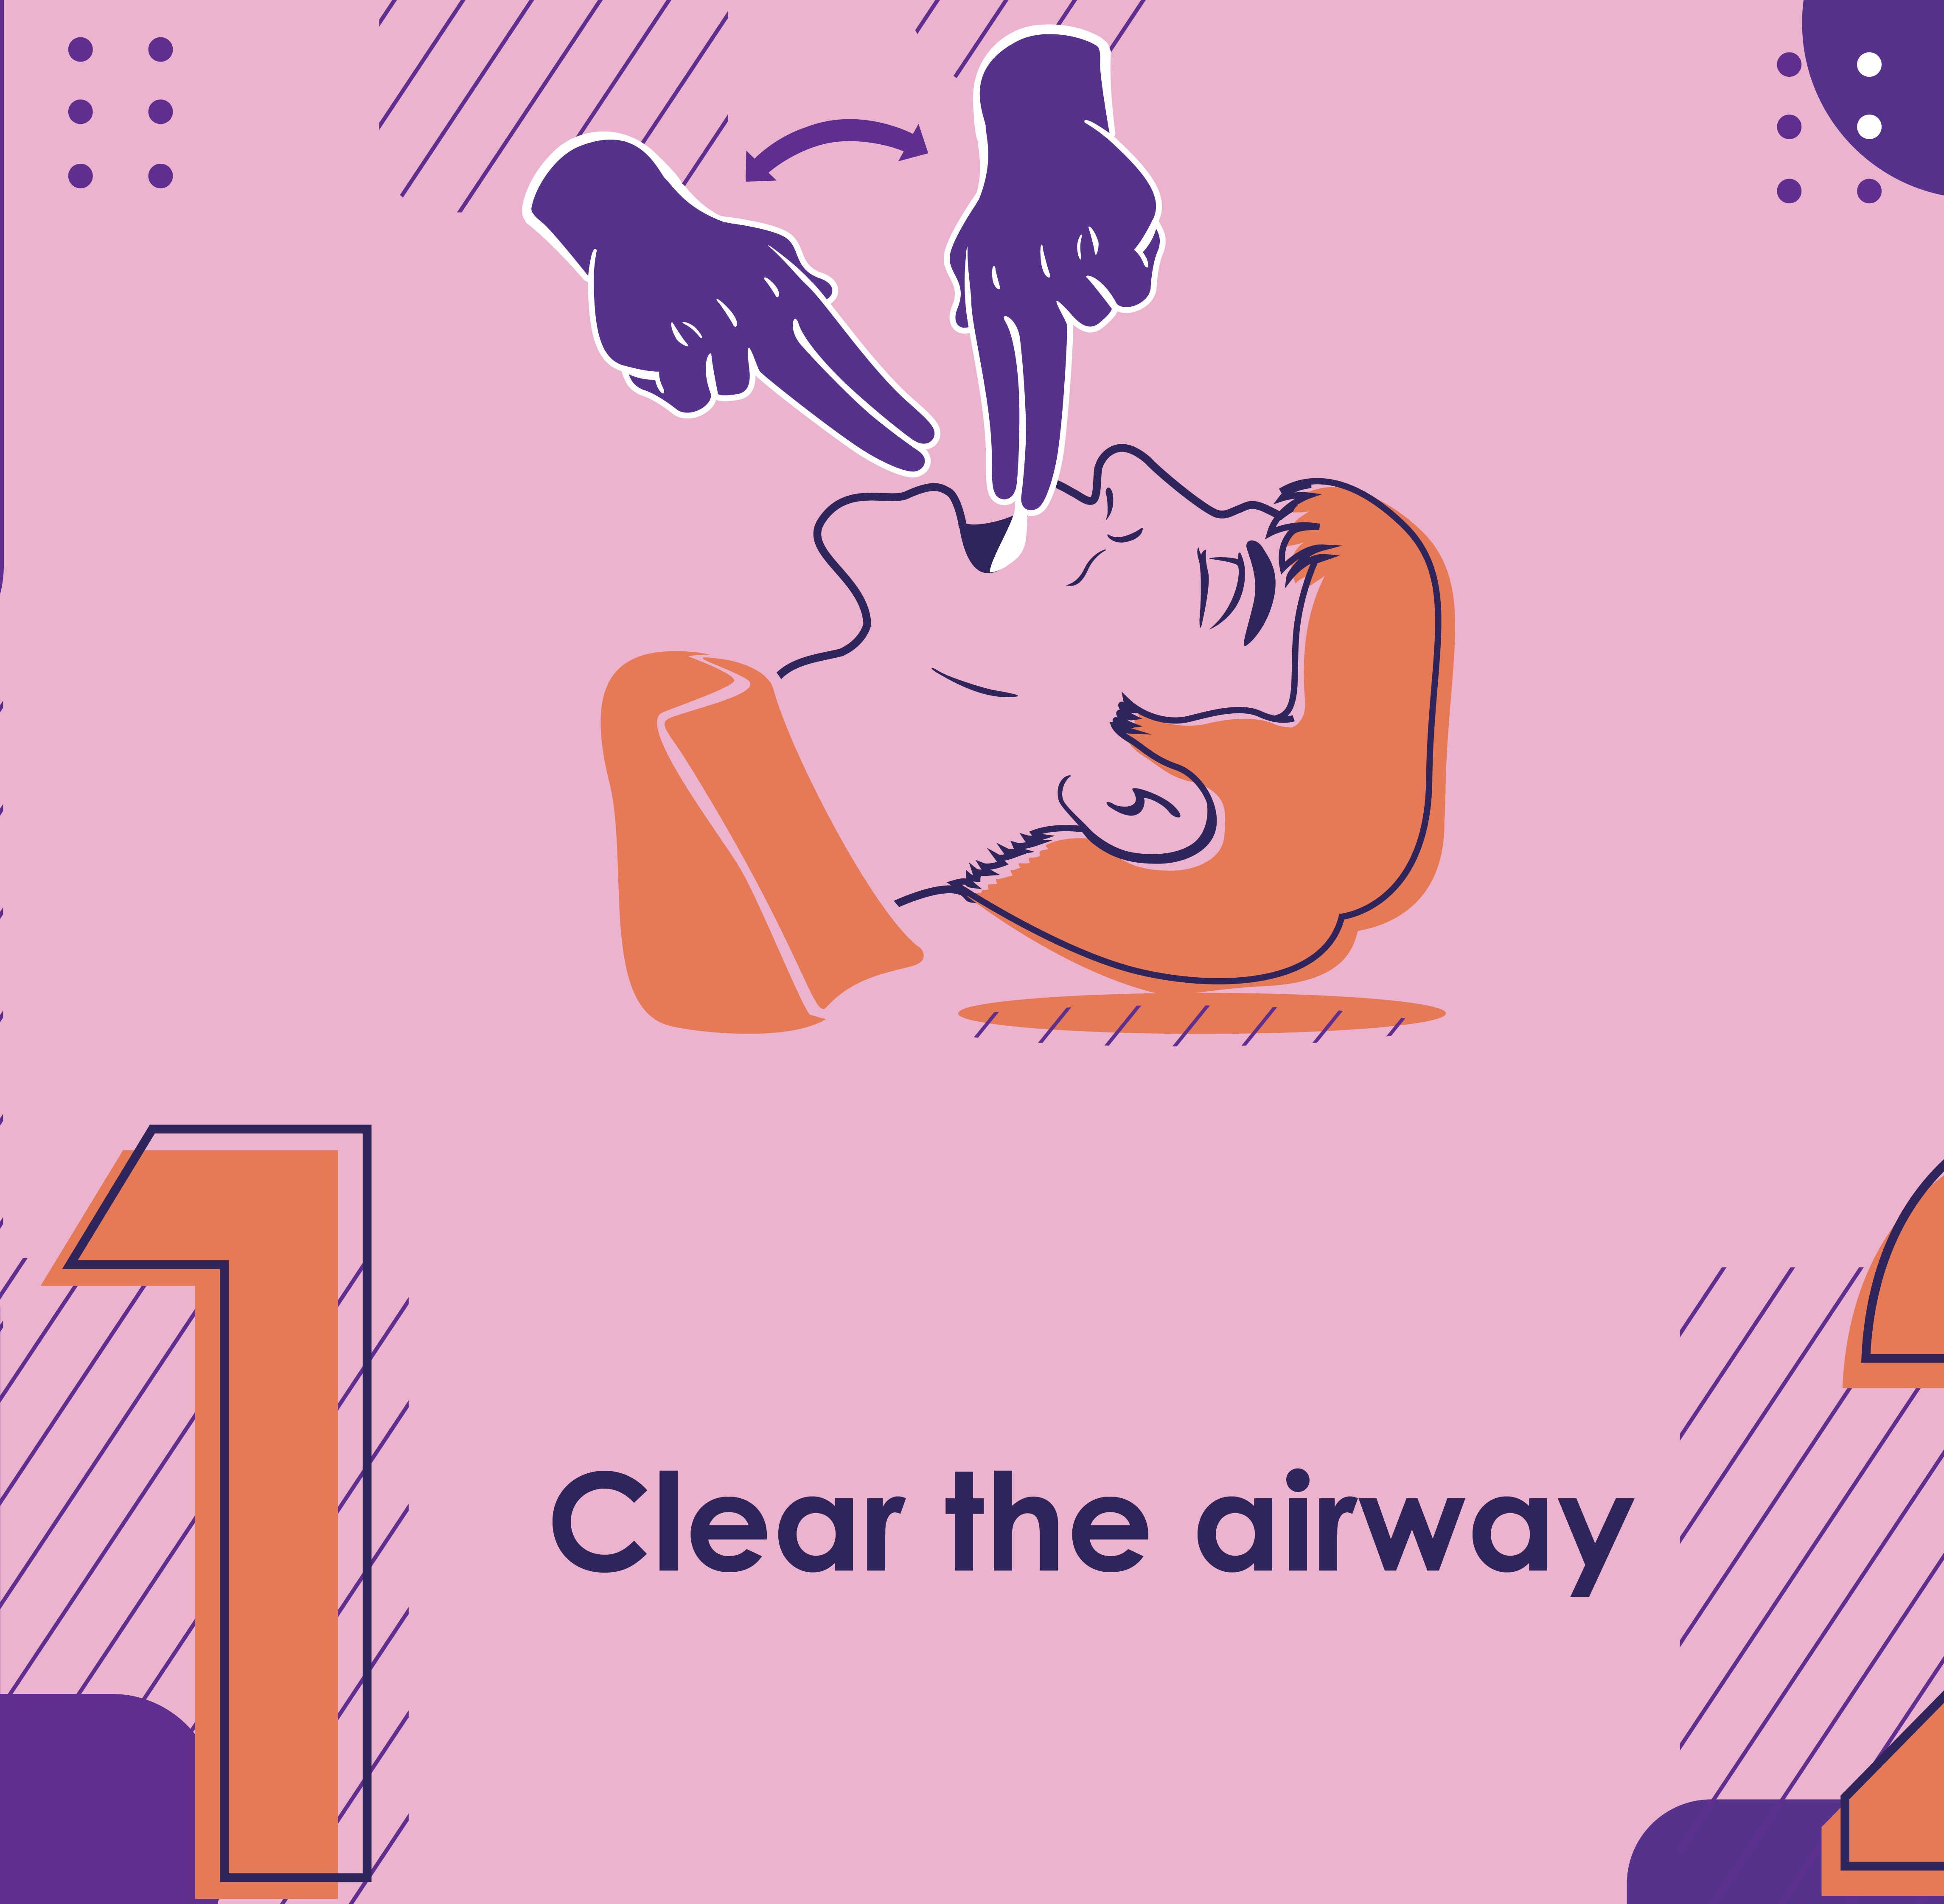 Clear the airway